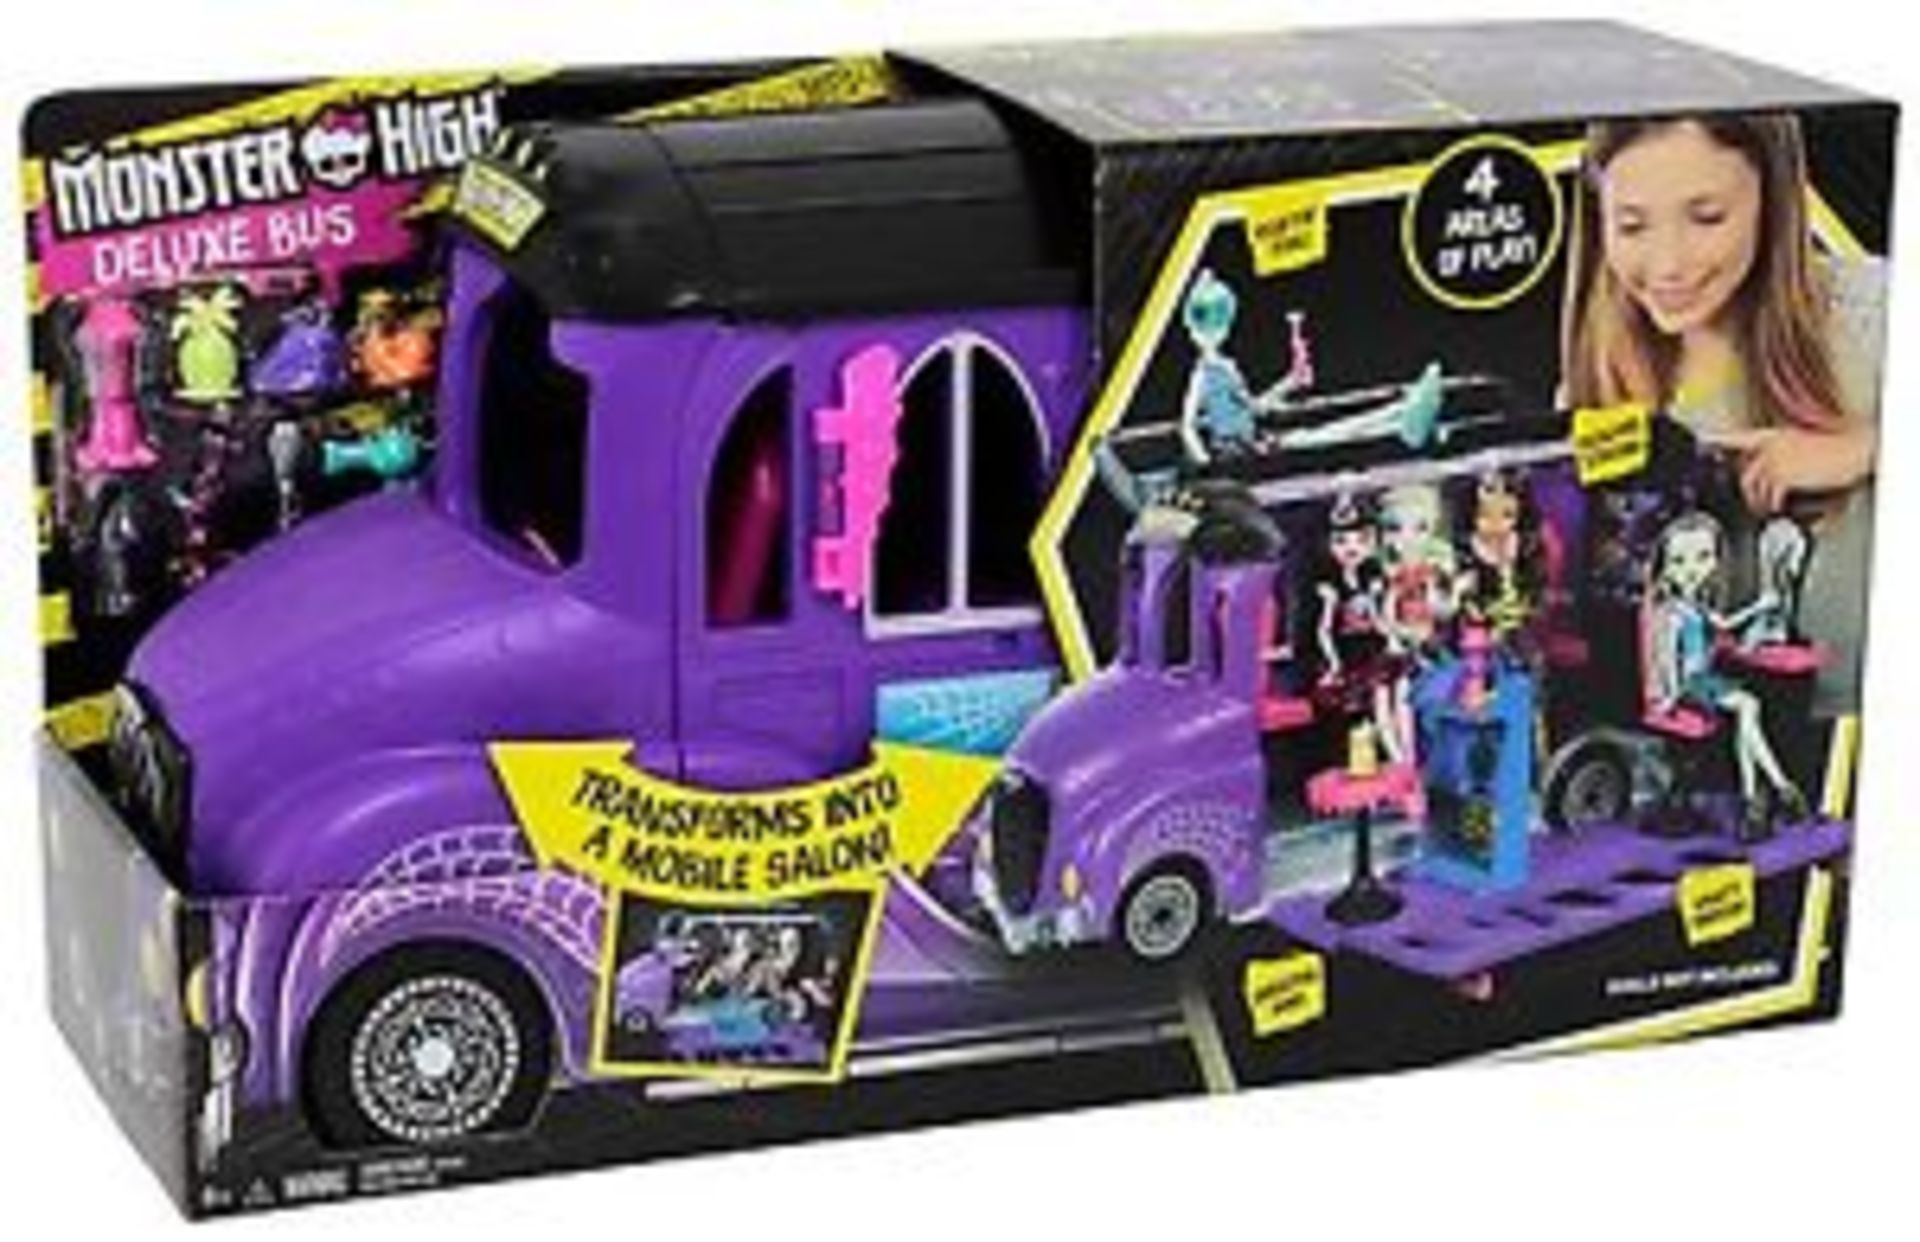 44 x Monster High Mattel FCV63 - Deluxe Bus and Mobile Salon Toy Playset - Pedicure Station Pool - F